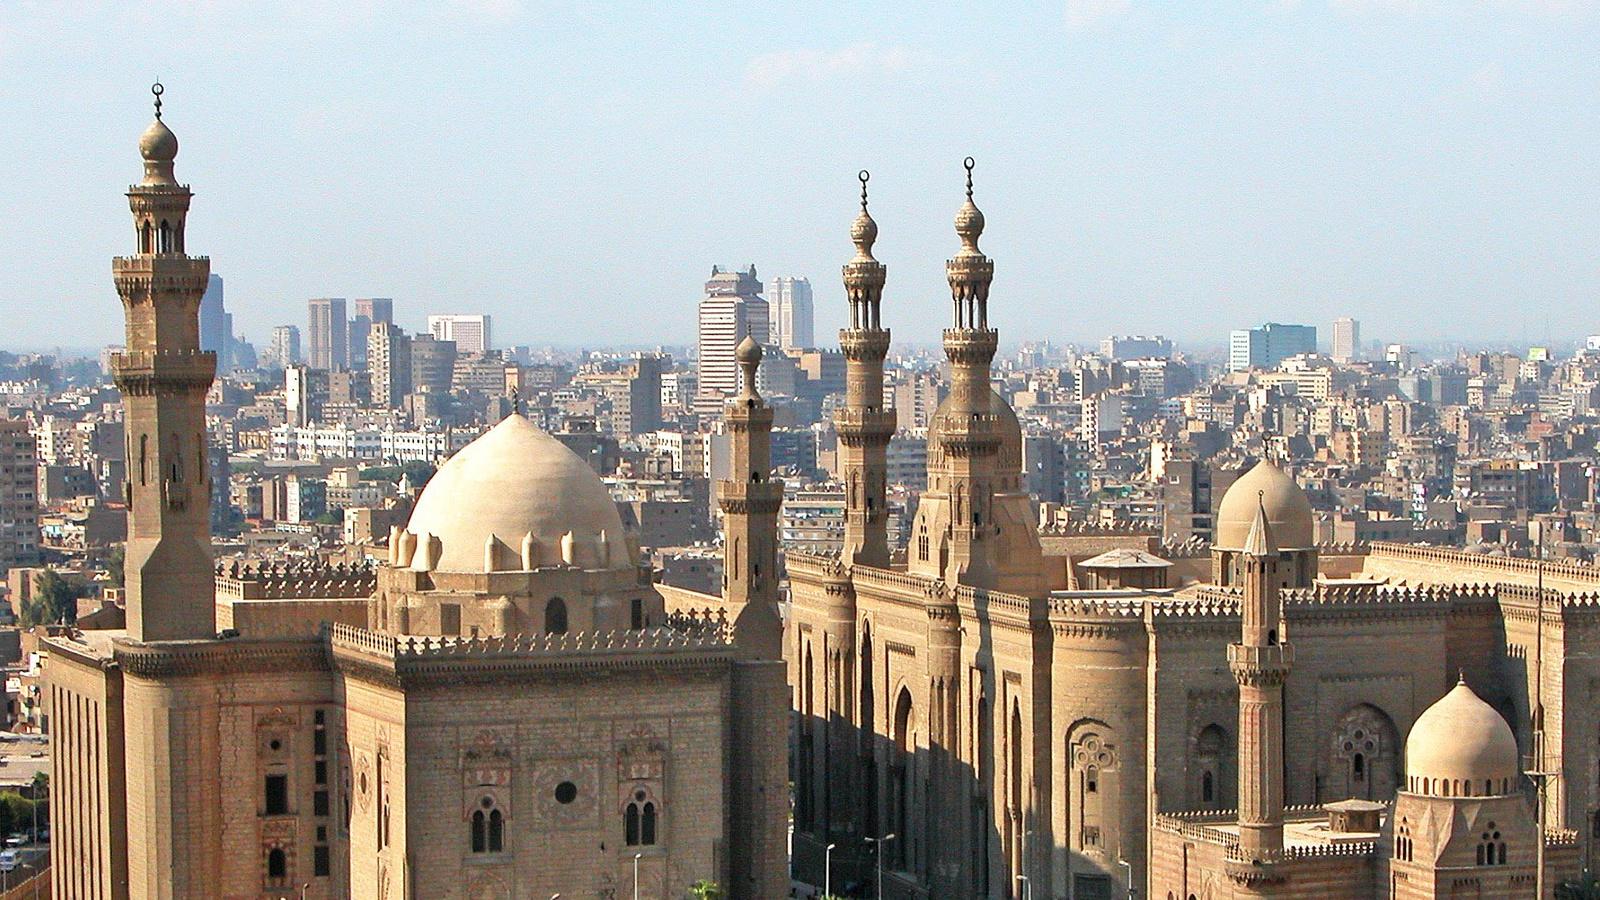 Image of Cairo with Alazhar mosque in the foreground. 